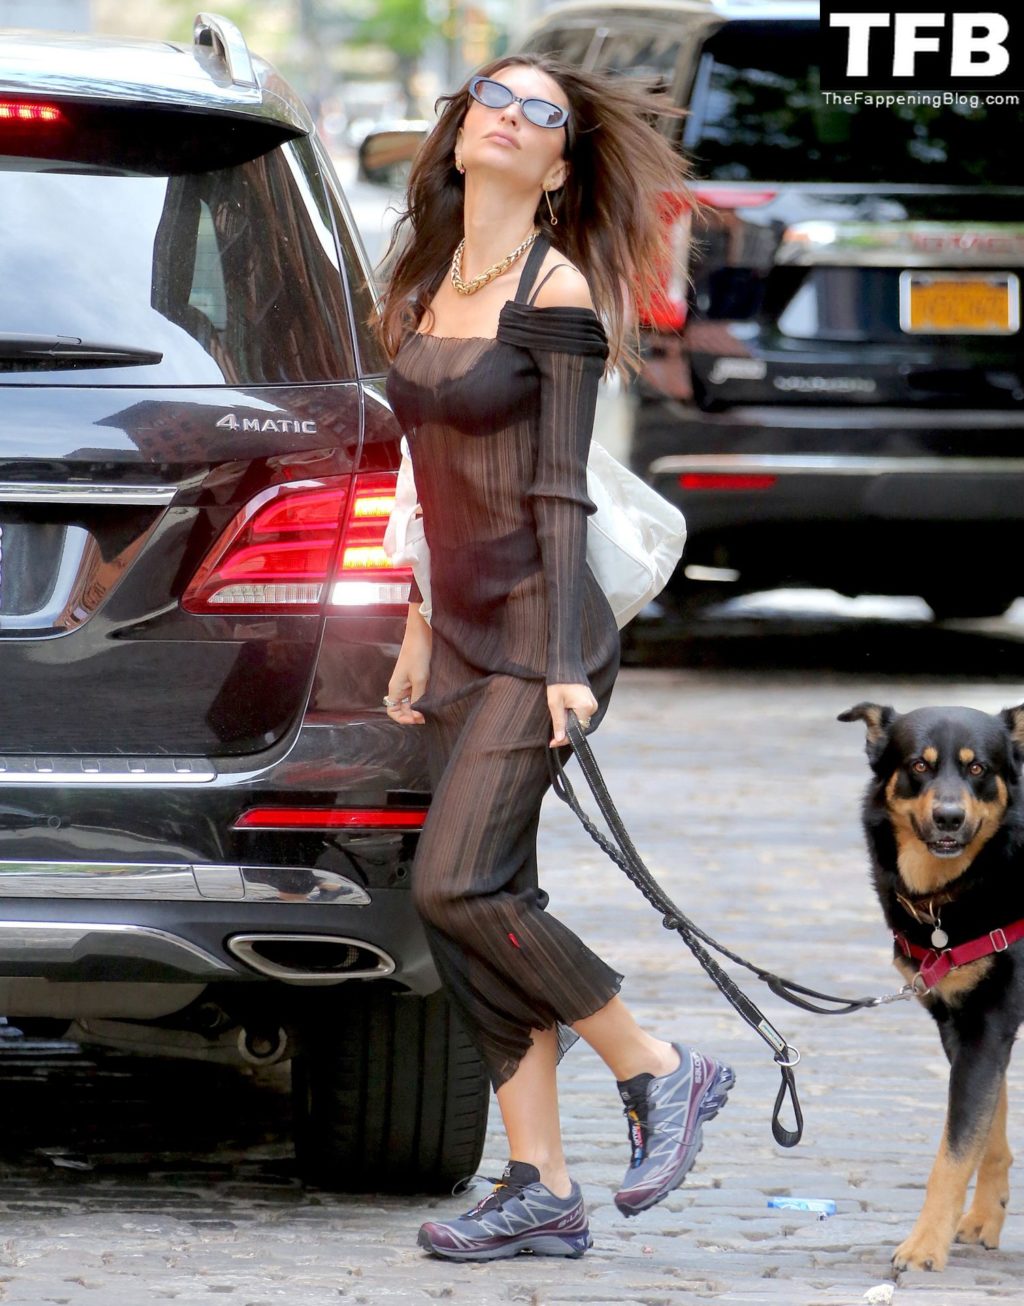 Emily Ratajkowski Sexy The Fappening Blog 24 1 1024x1306 - Emily Ratajkowski Bares It All in a See-Through Dress While Out Walking Her Dog in New York (33 Photos)